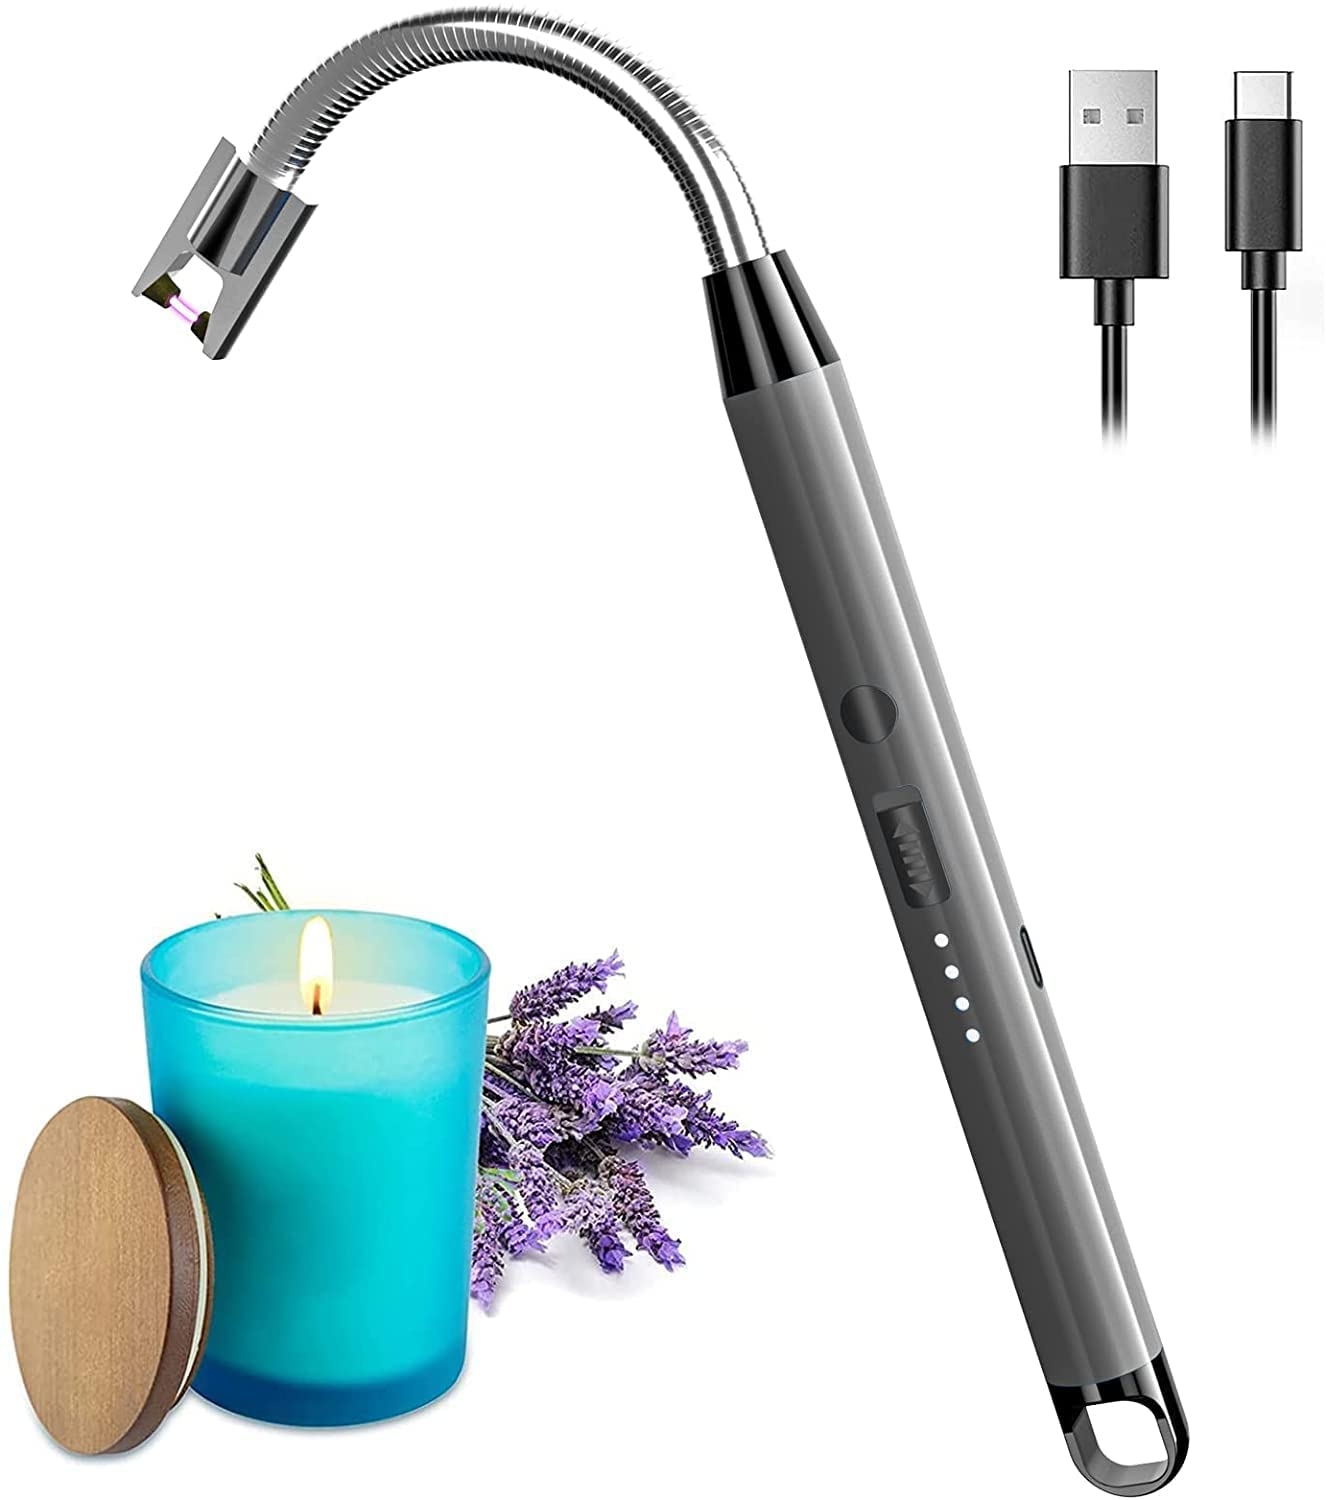 BEBO CREATIONS Electric Arc Plasma Lighter for Gas Stove, Candles, Charcoal & Fire Crackers | Rechargeable with USB Type-C, 360 Degree Long Flexible Neck for Safety - (Silver) Cigarette Lighter